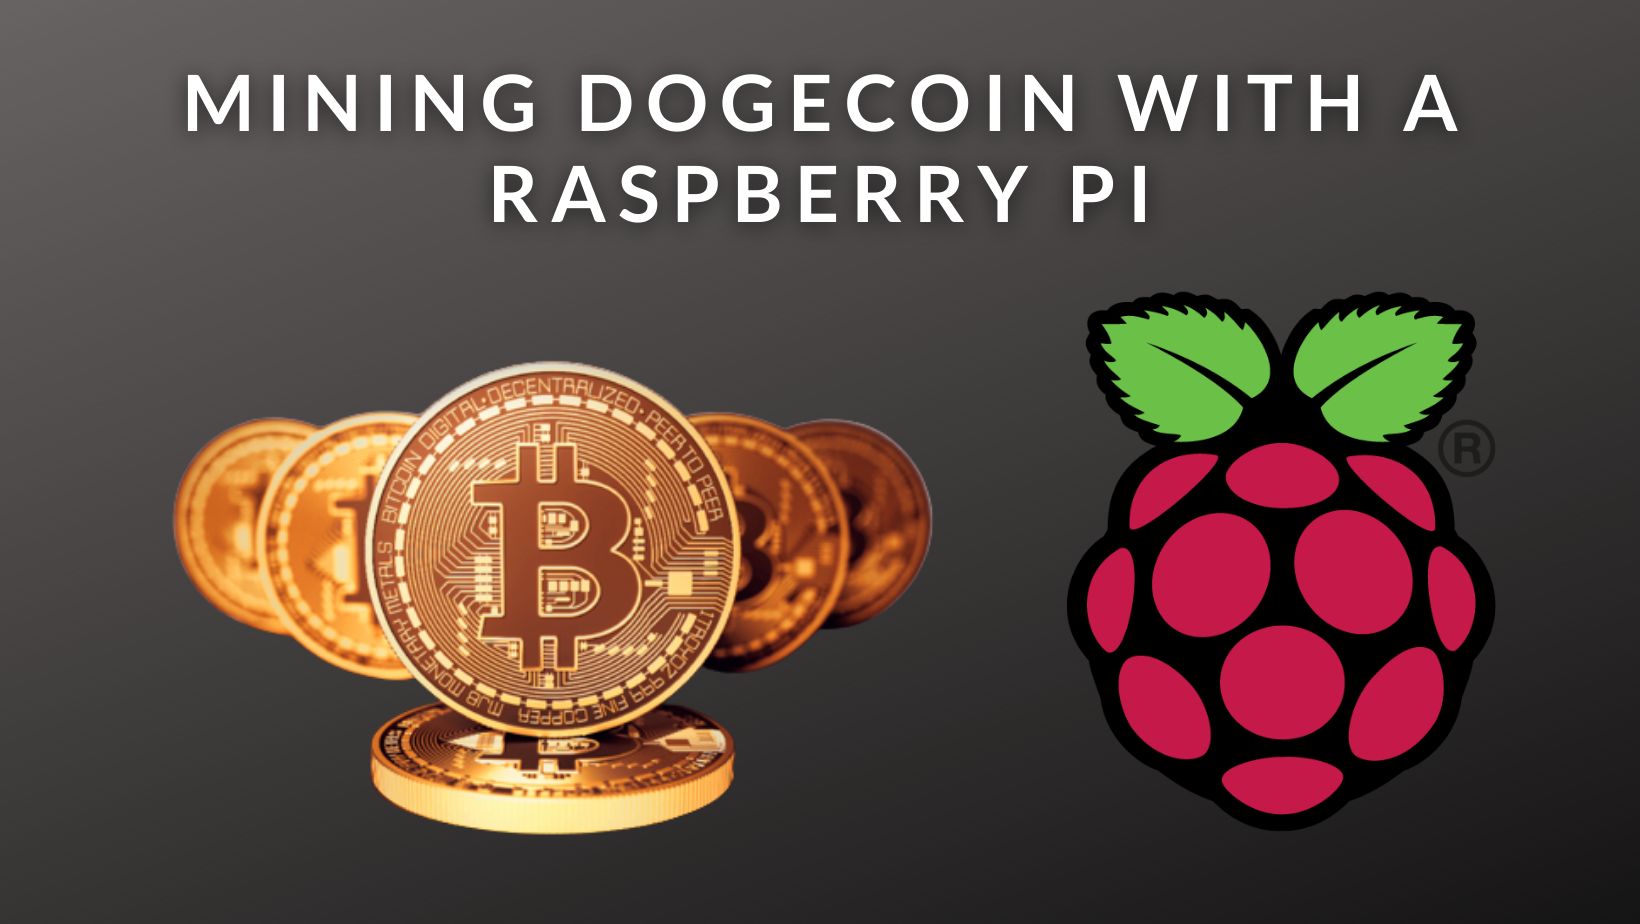 The Complete Guide to Mining Dogecoin with a Raspberry Pi